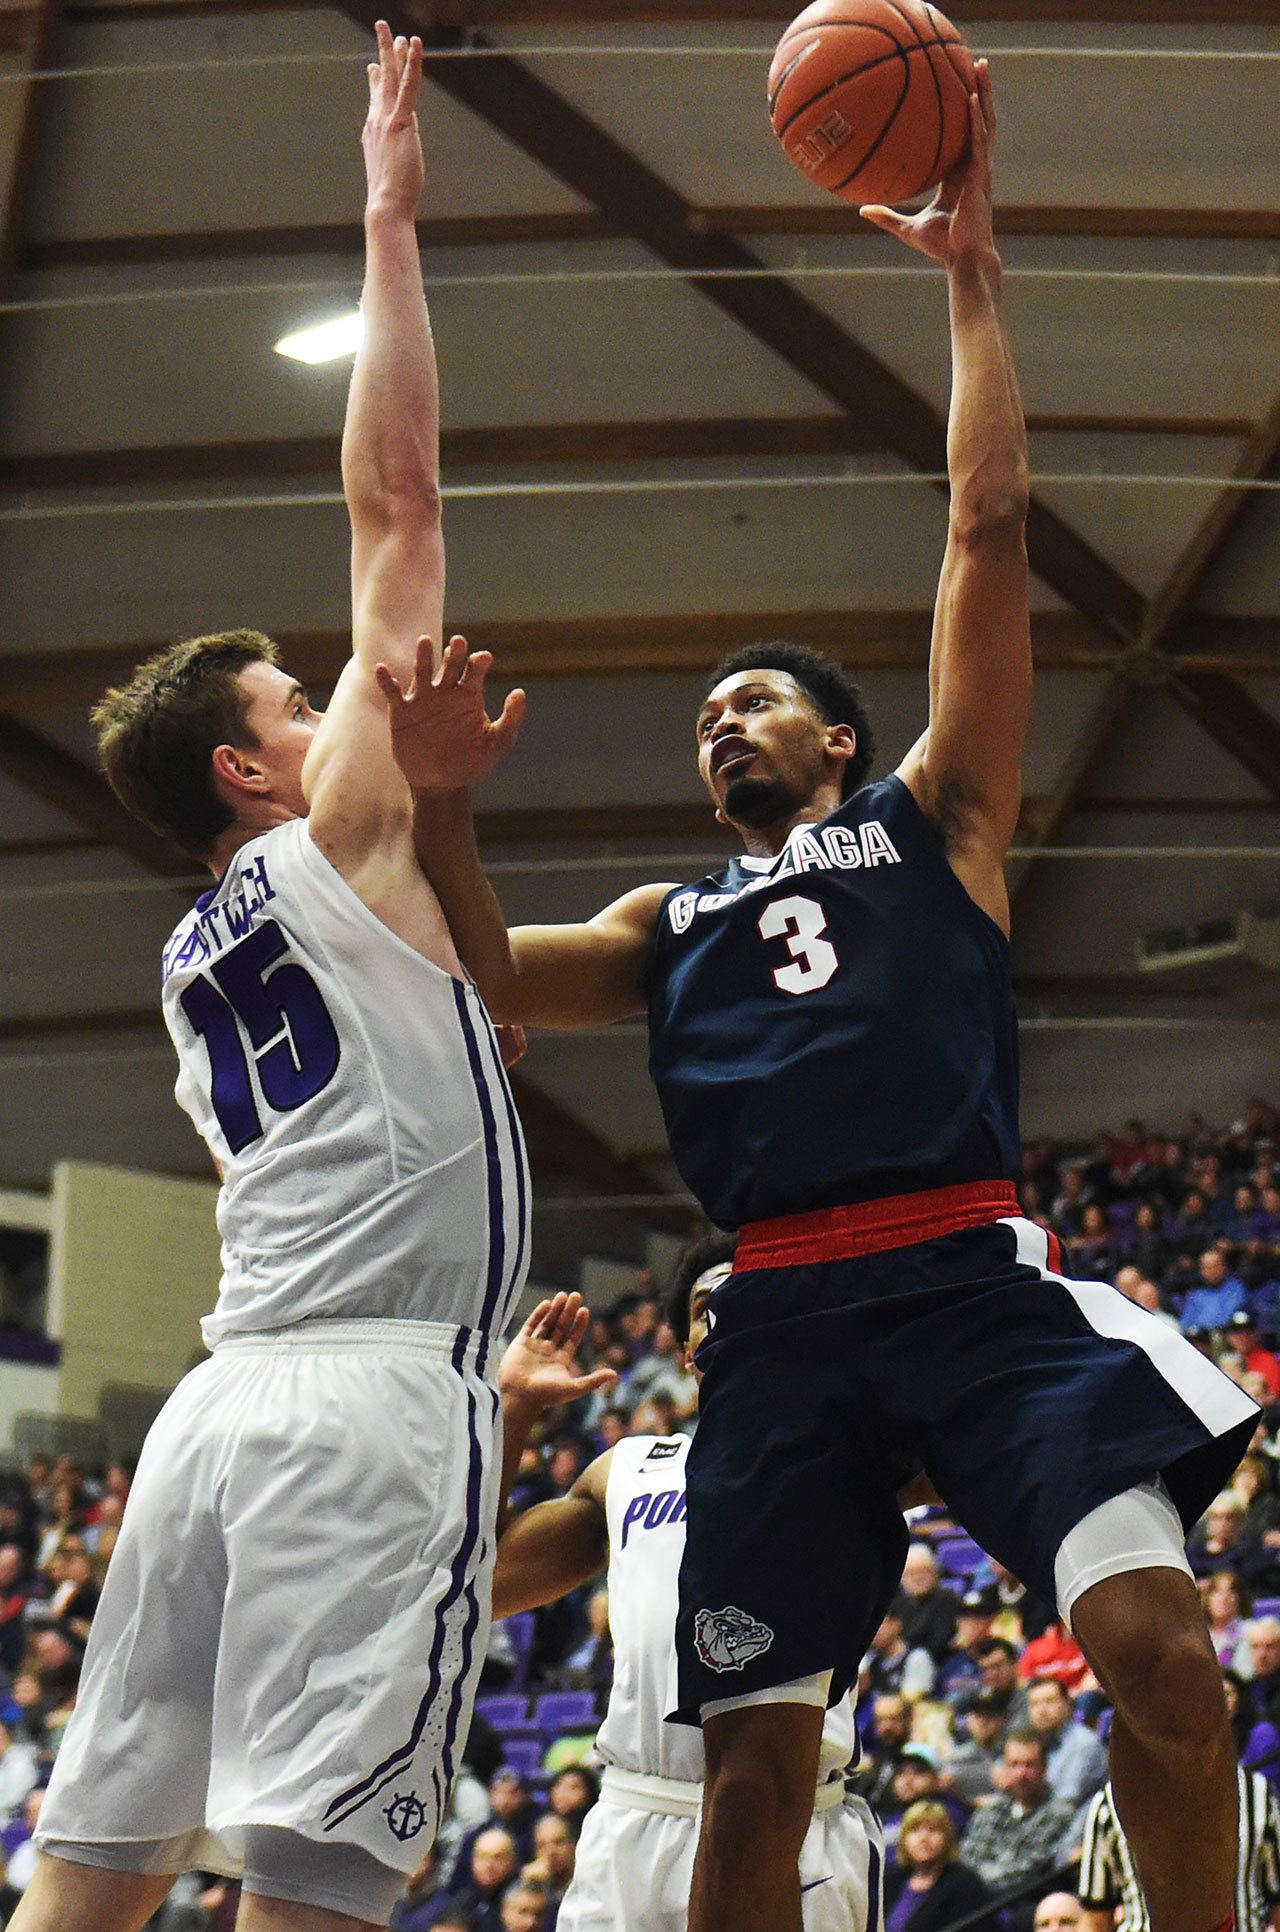 Gonzaga forward Johnathan Williams puts up a shot over Portland center Philipp Hartwich during the second half of Monday’s game. (AP Photo/Steve Dykes)